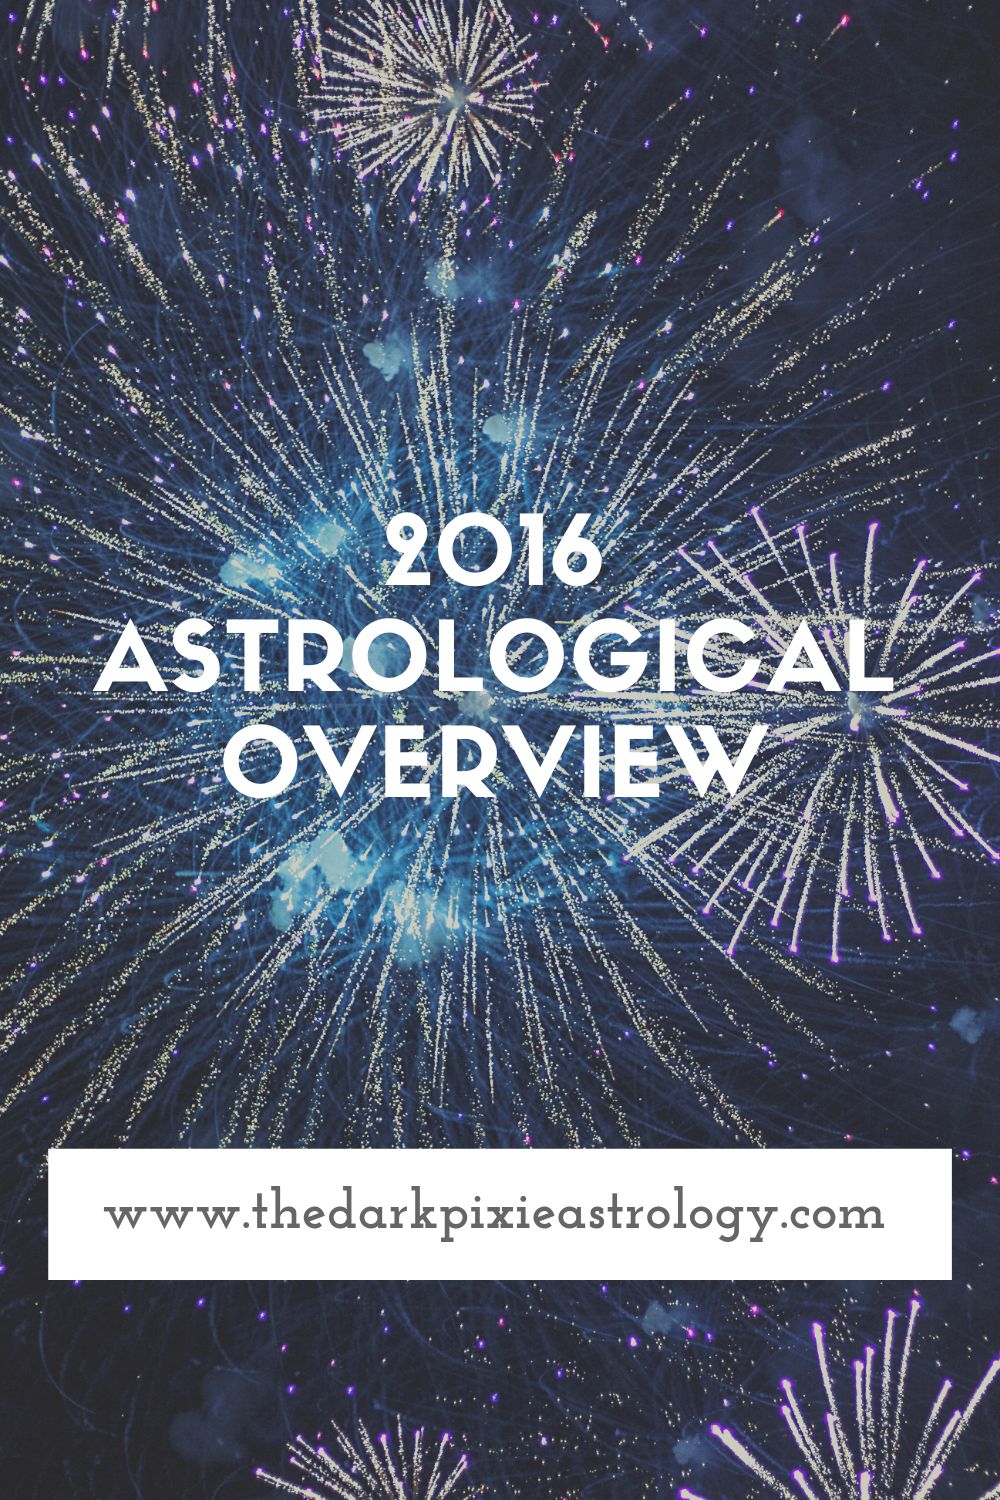 2016 Astrological Overview - The Dark Pixie Astrology